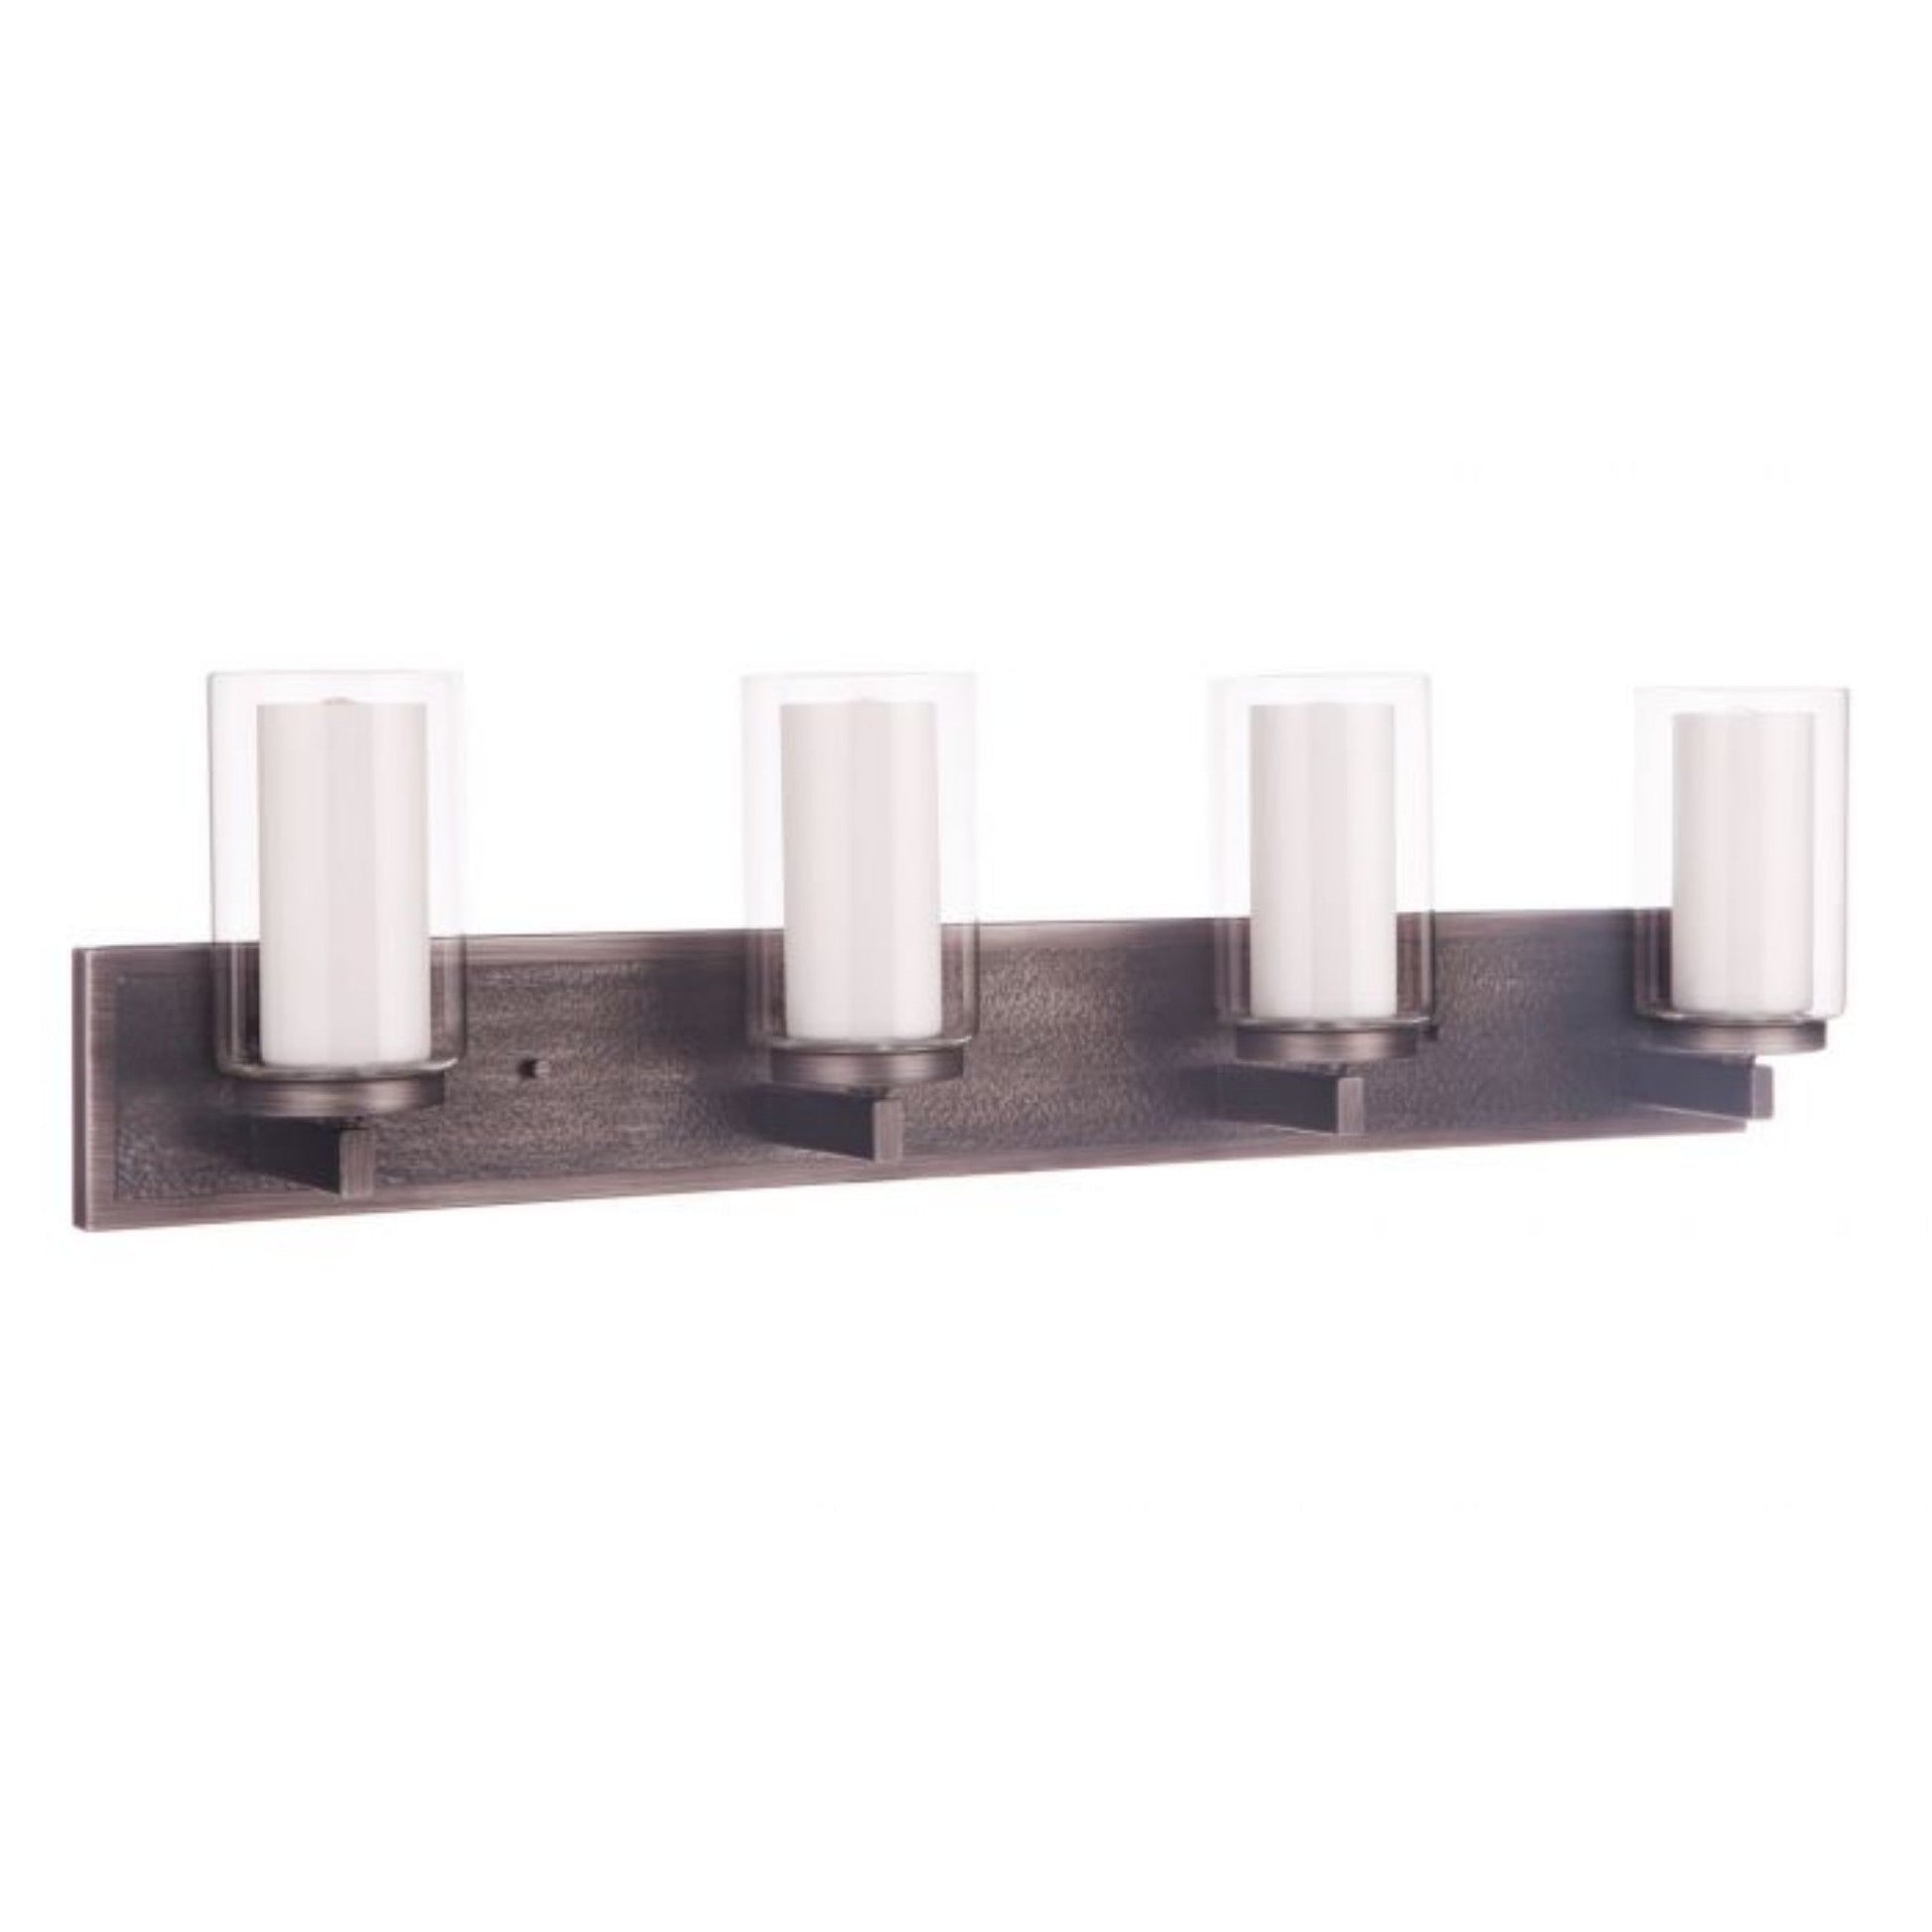 Craftmade Texture 33" 4-Light Natural Iron Vanity Light With White Frosted Inner and Clear Outer Glass Shades